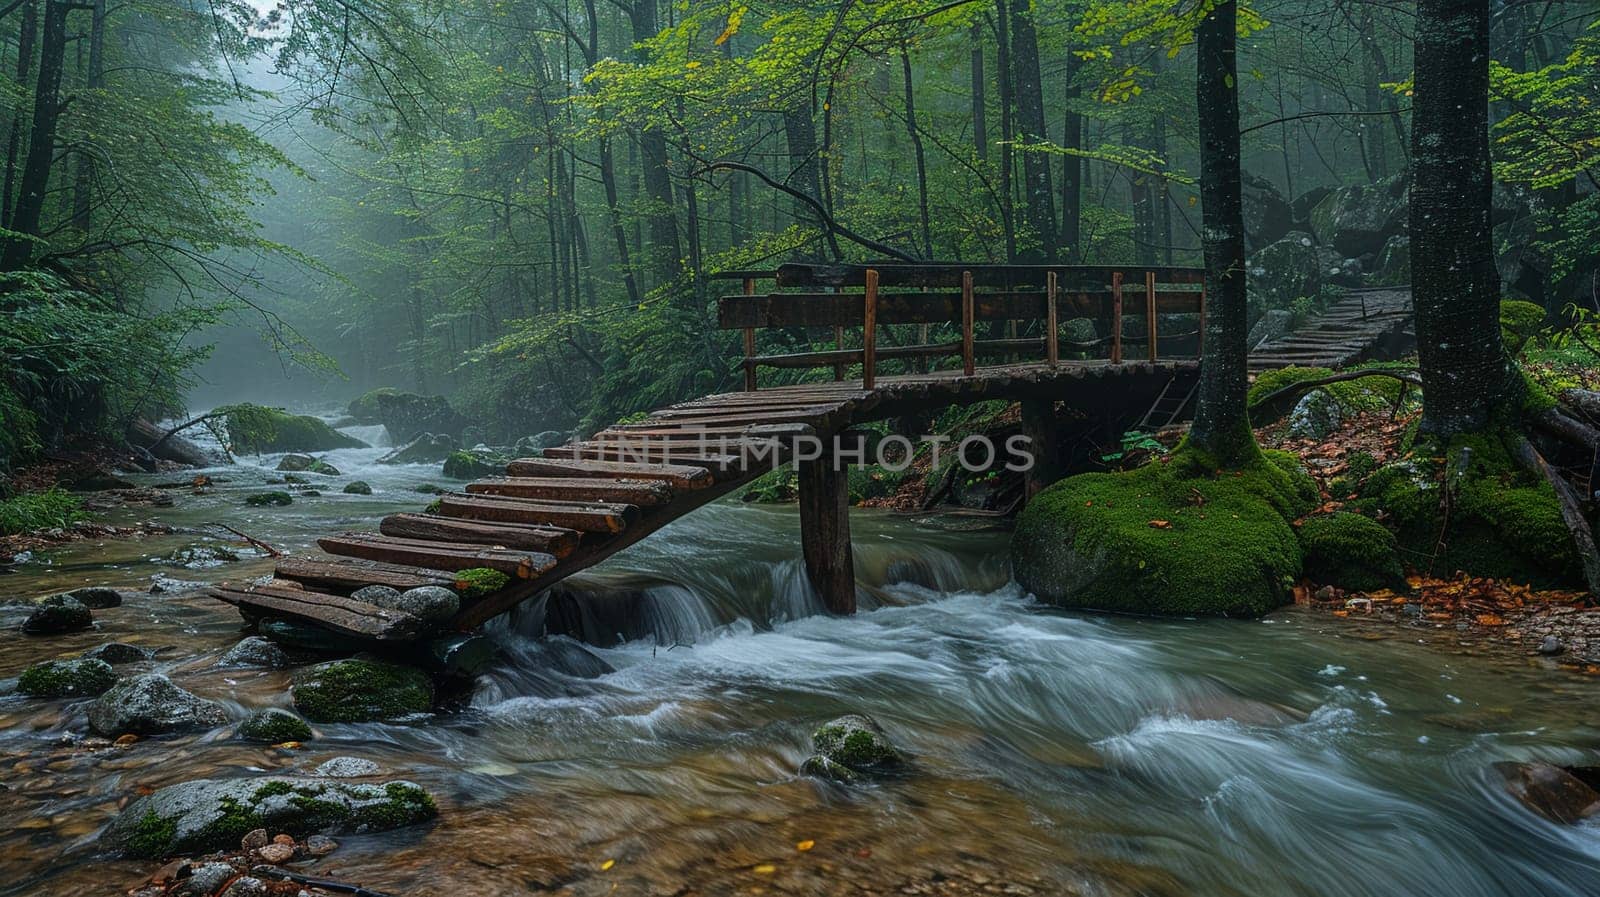 A rustic wooden bridge over a forest stream, evoking adventure and exploration.